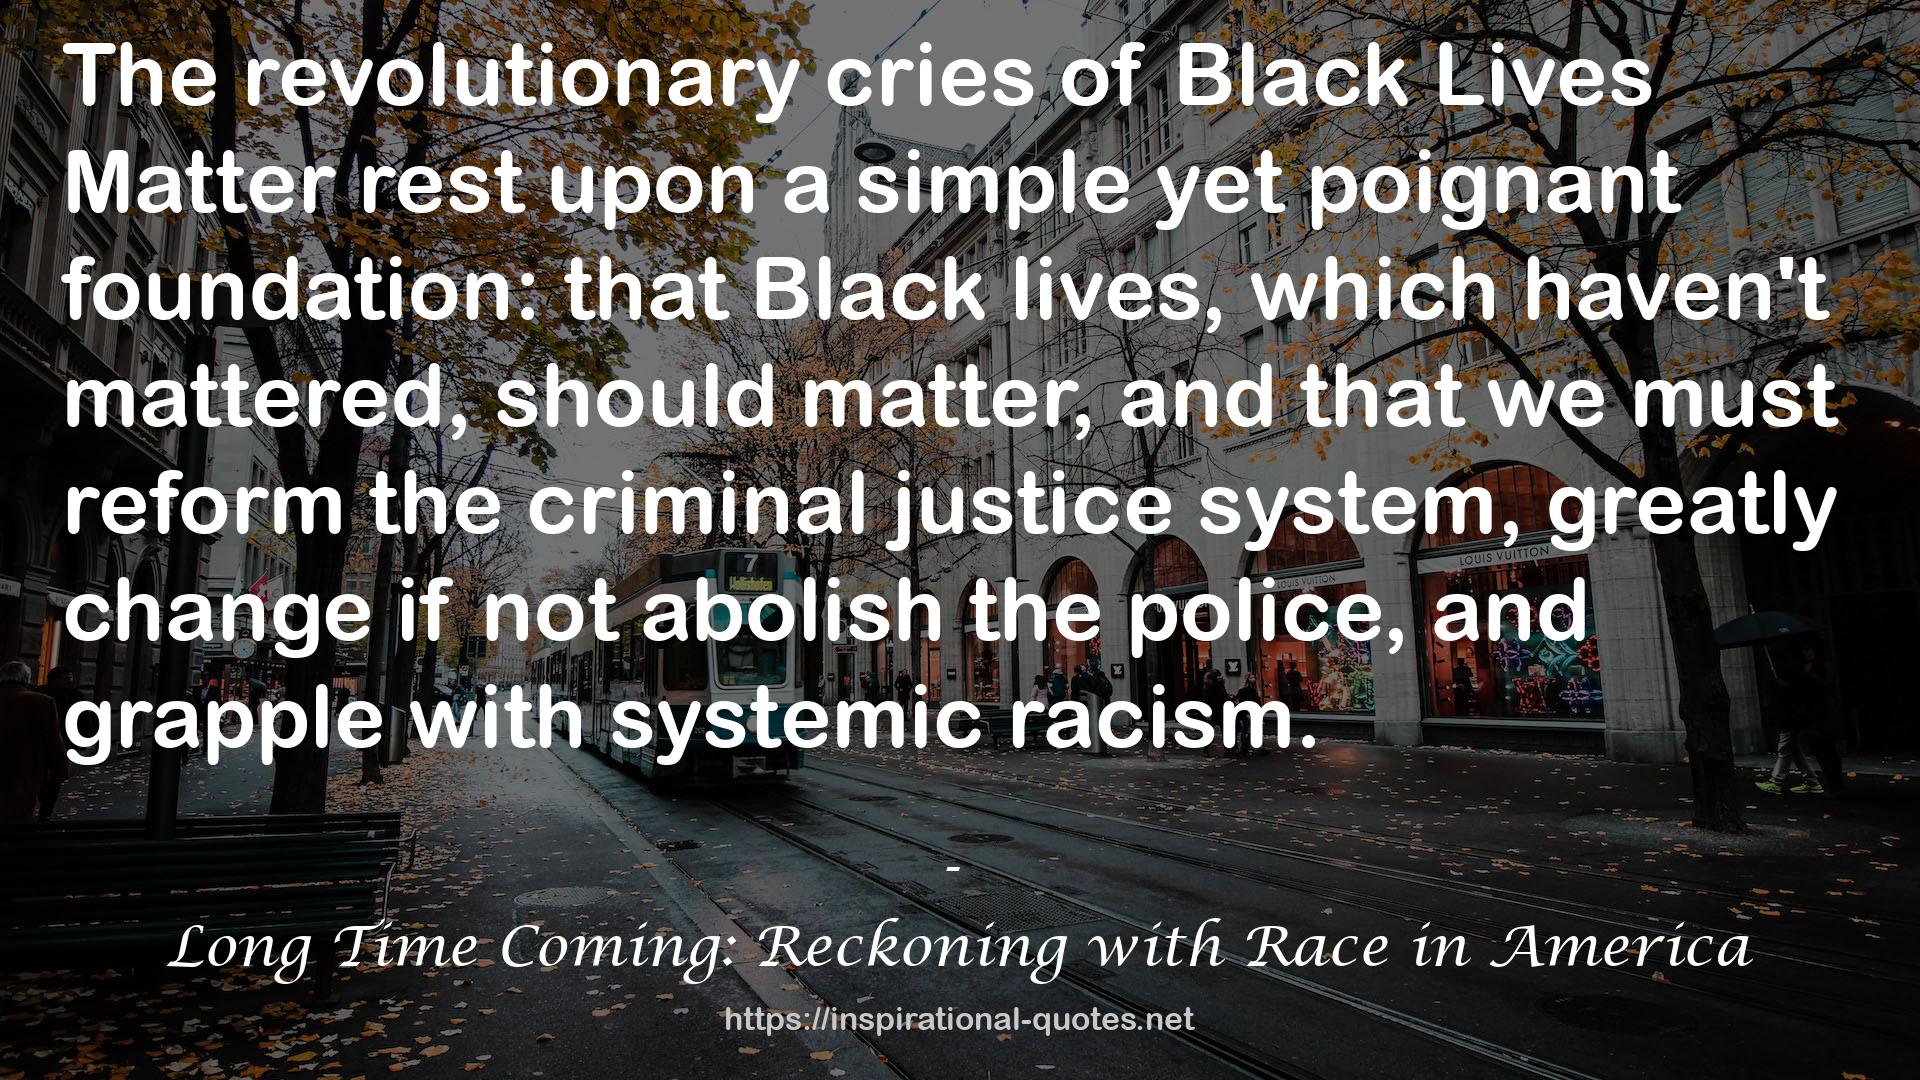 Long Time Coming: Reckoning with Race in America QUOTES